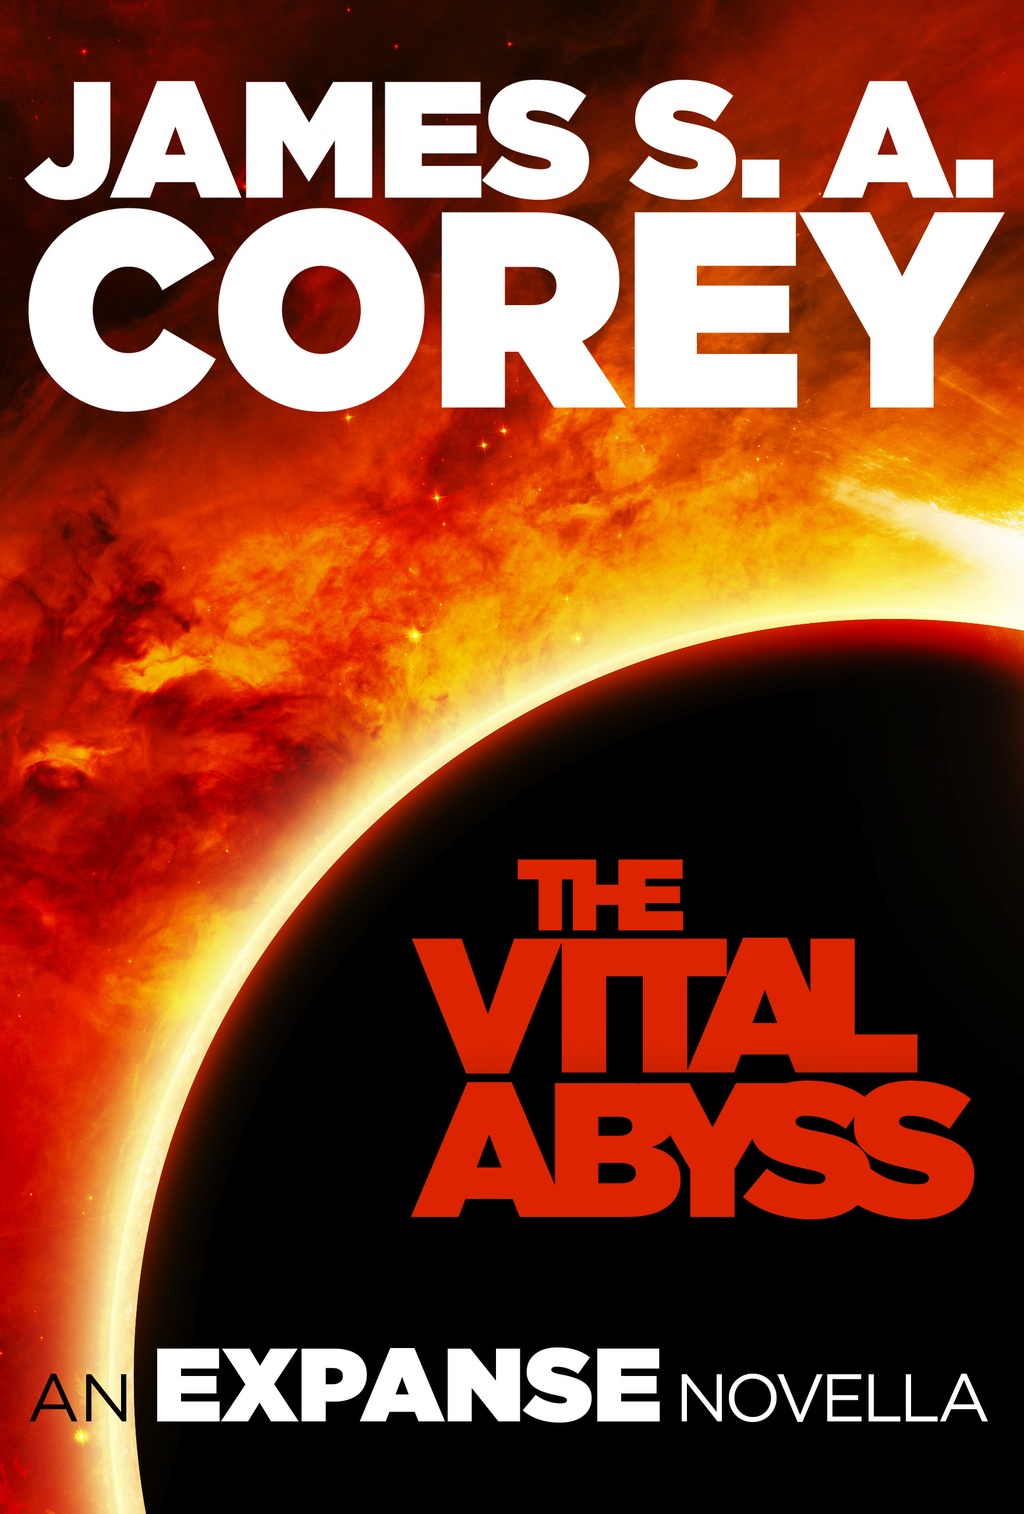 James S.A. Corey: The Vital Abyss (2015, Little, Brown Book Group Limited)